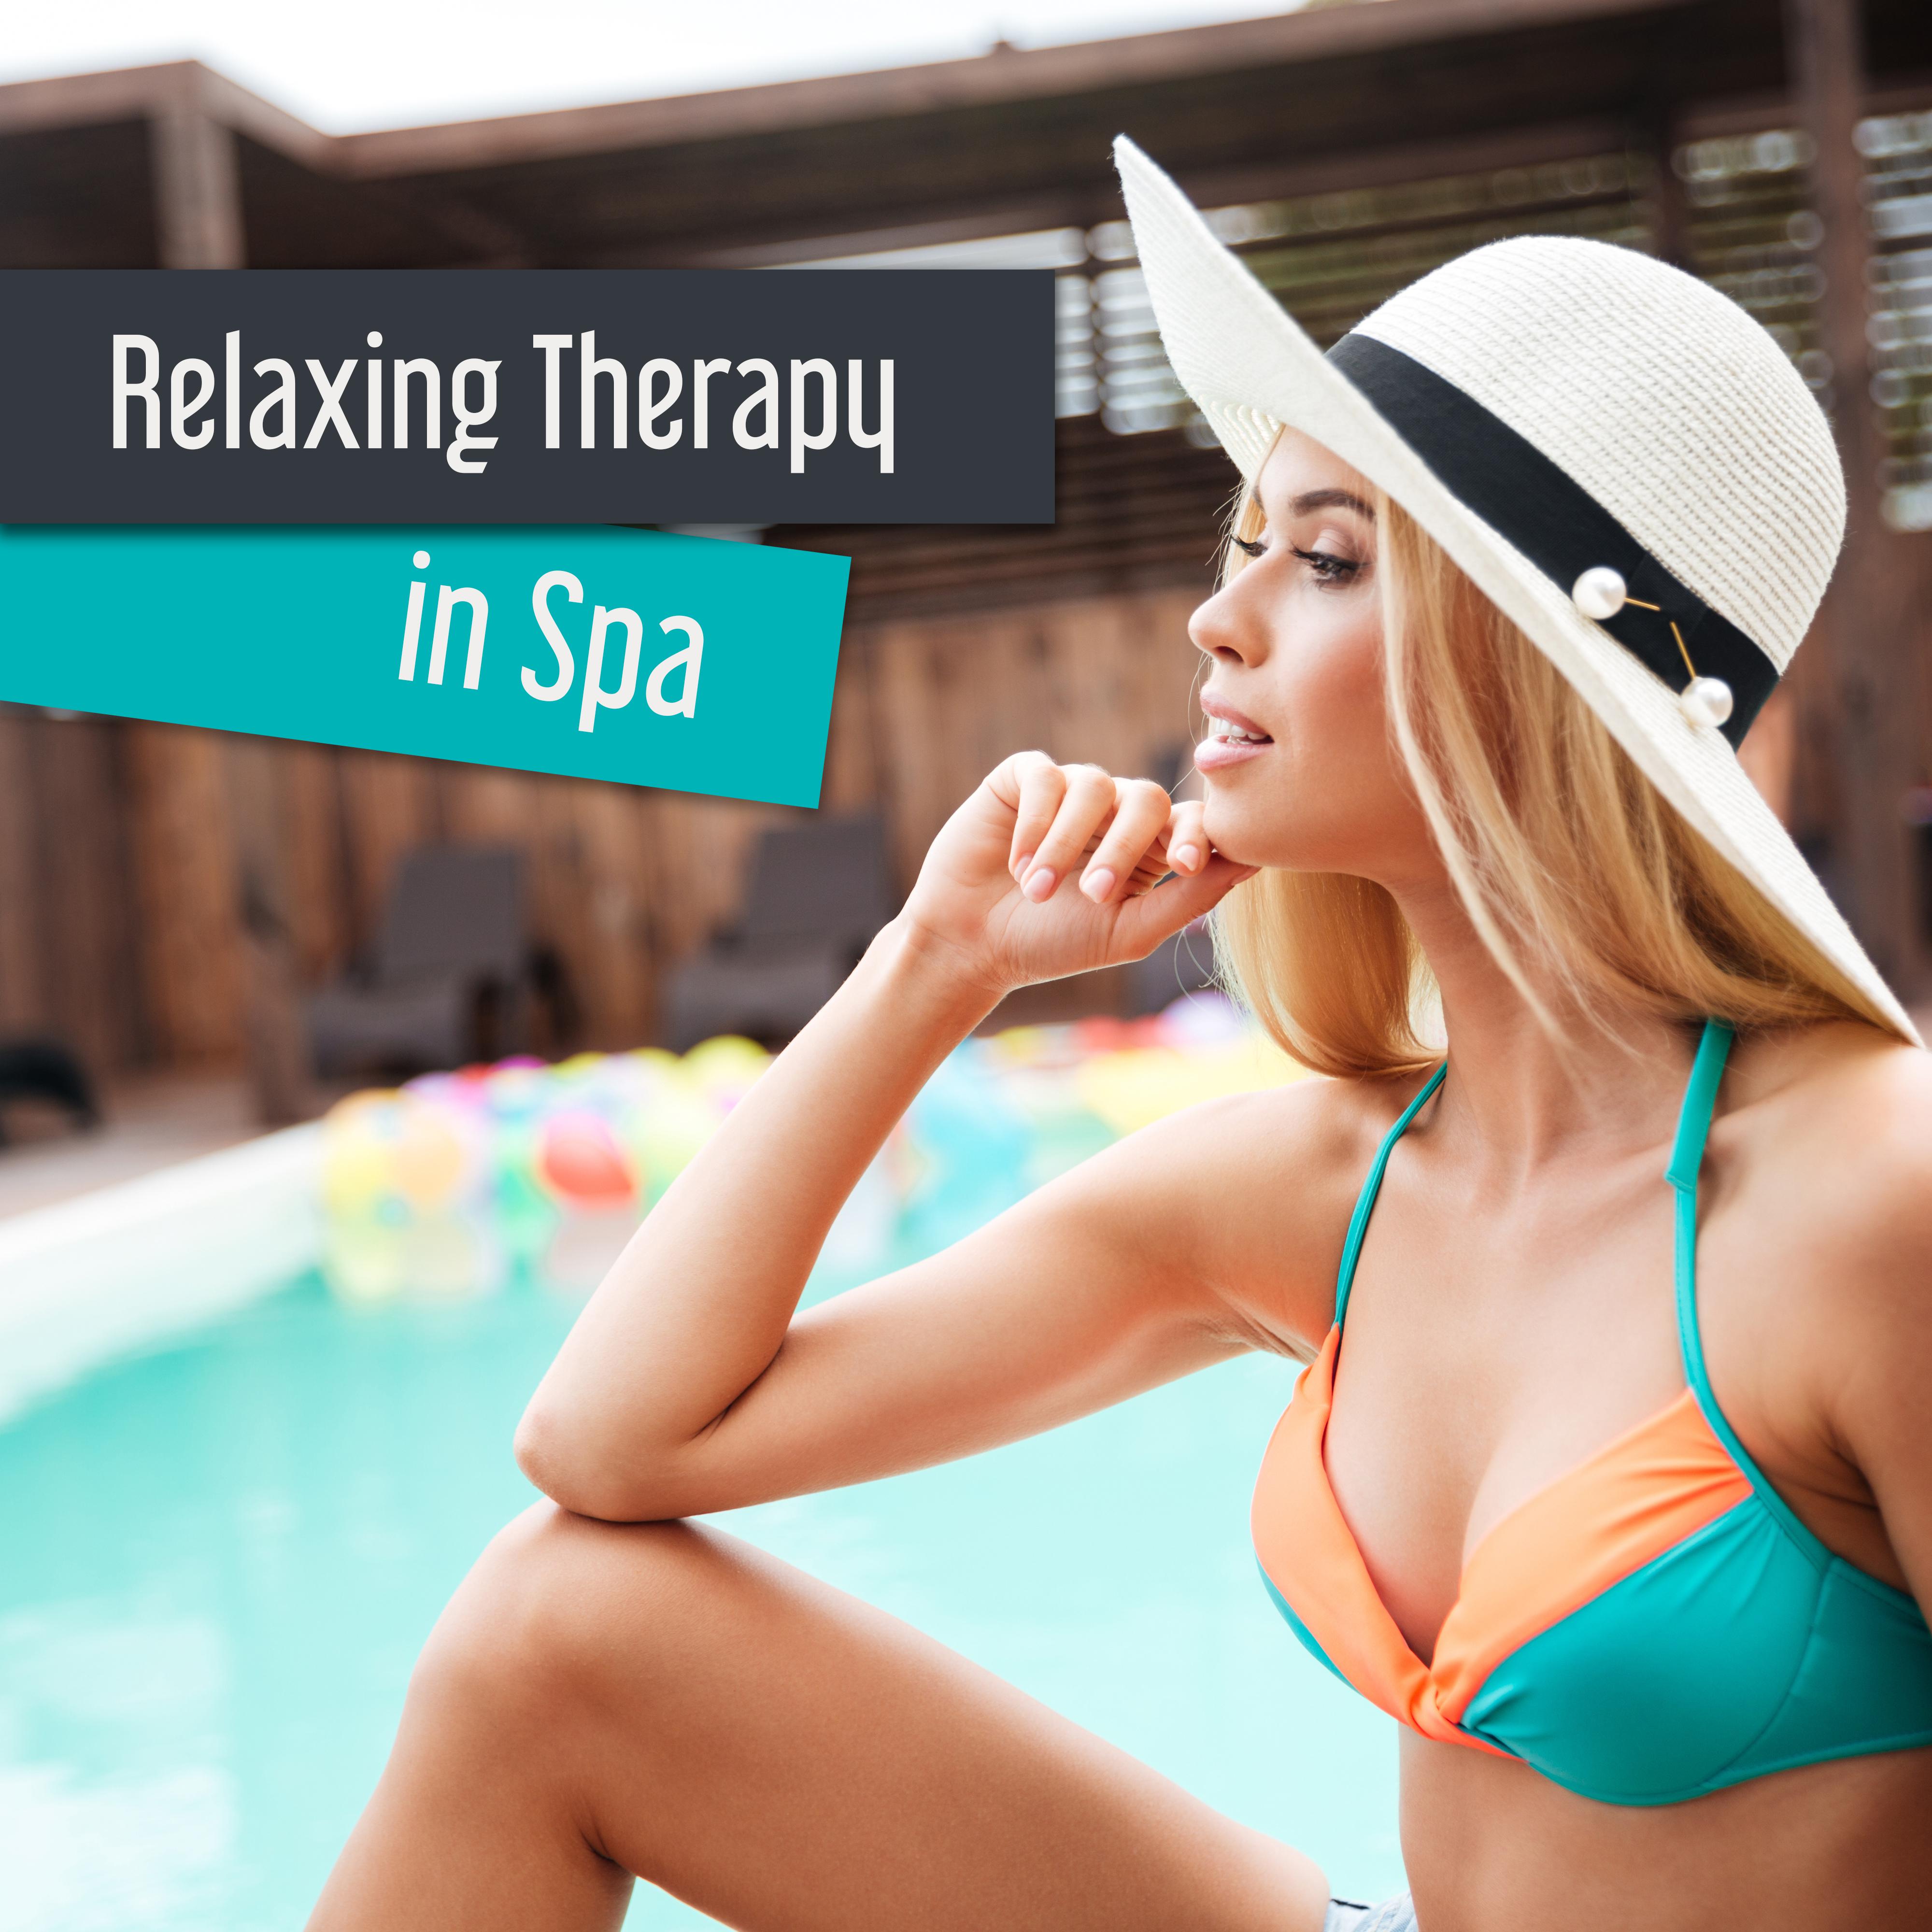 Relaxing Therapy in Spa – Healing Music for Wellness, Massage, Healing, Pure Sleep, Zen, Relaxation, Spa Dreams, Soft Nature Sounds, Tranquility